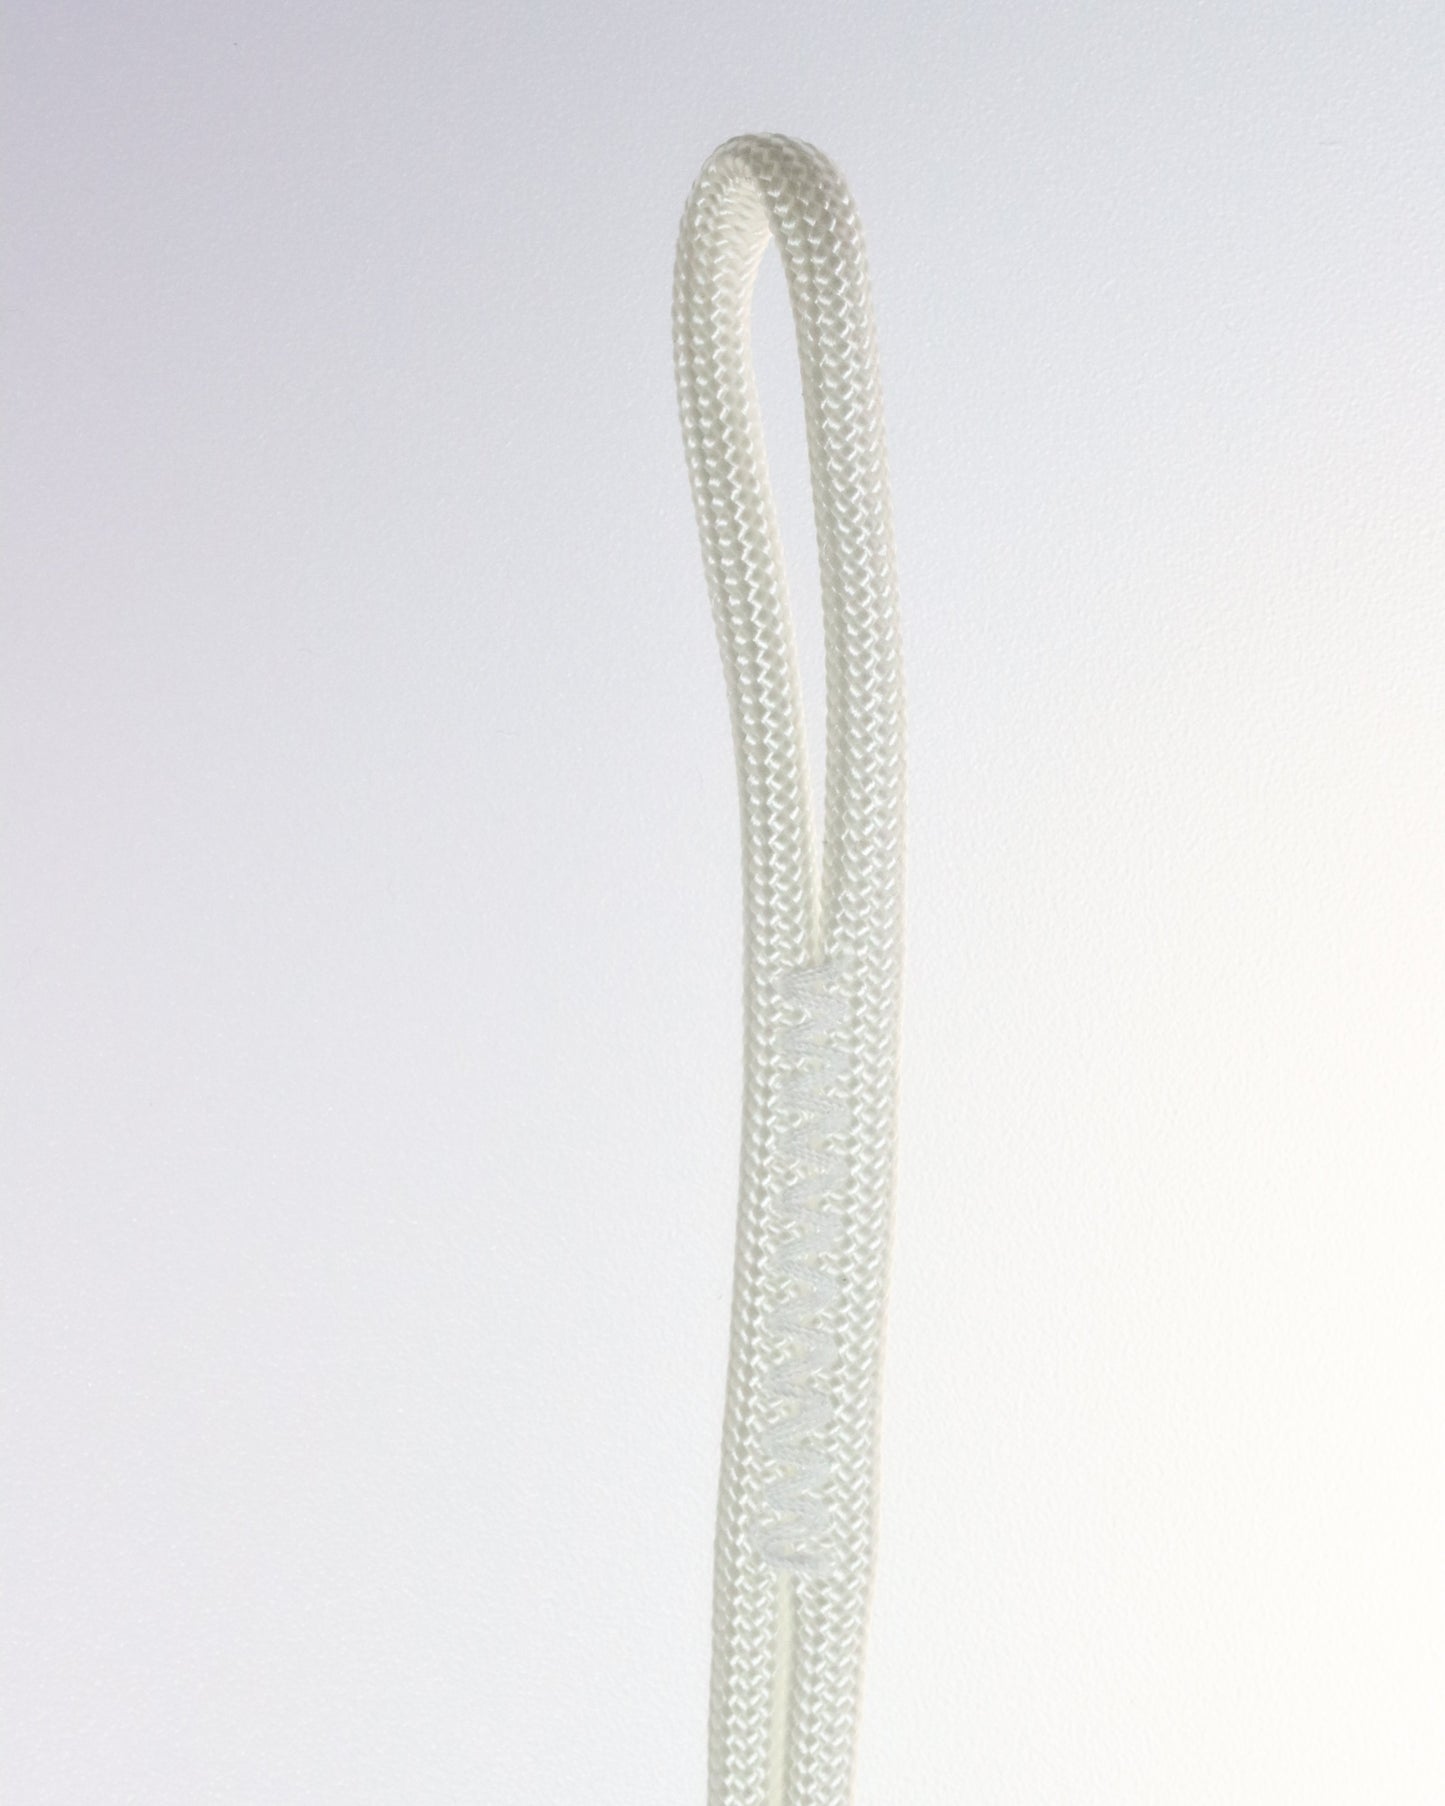 U.BAG Strap Extension made from paracord in color white